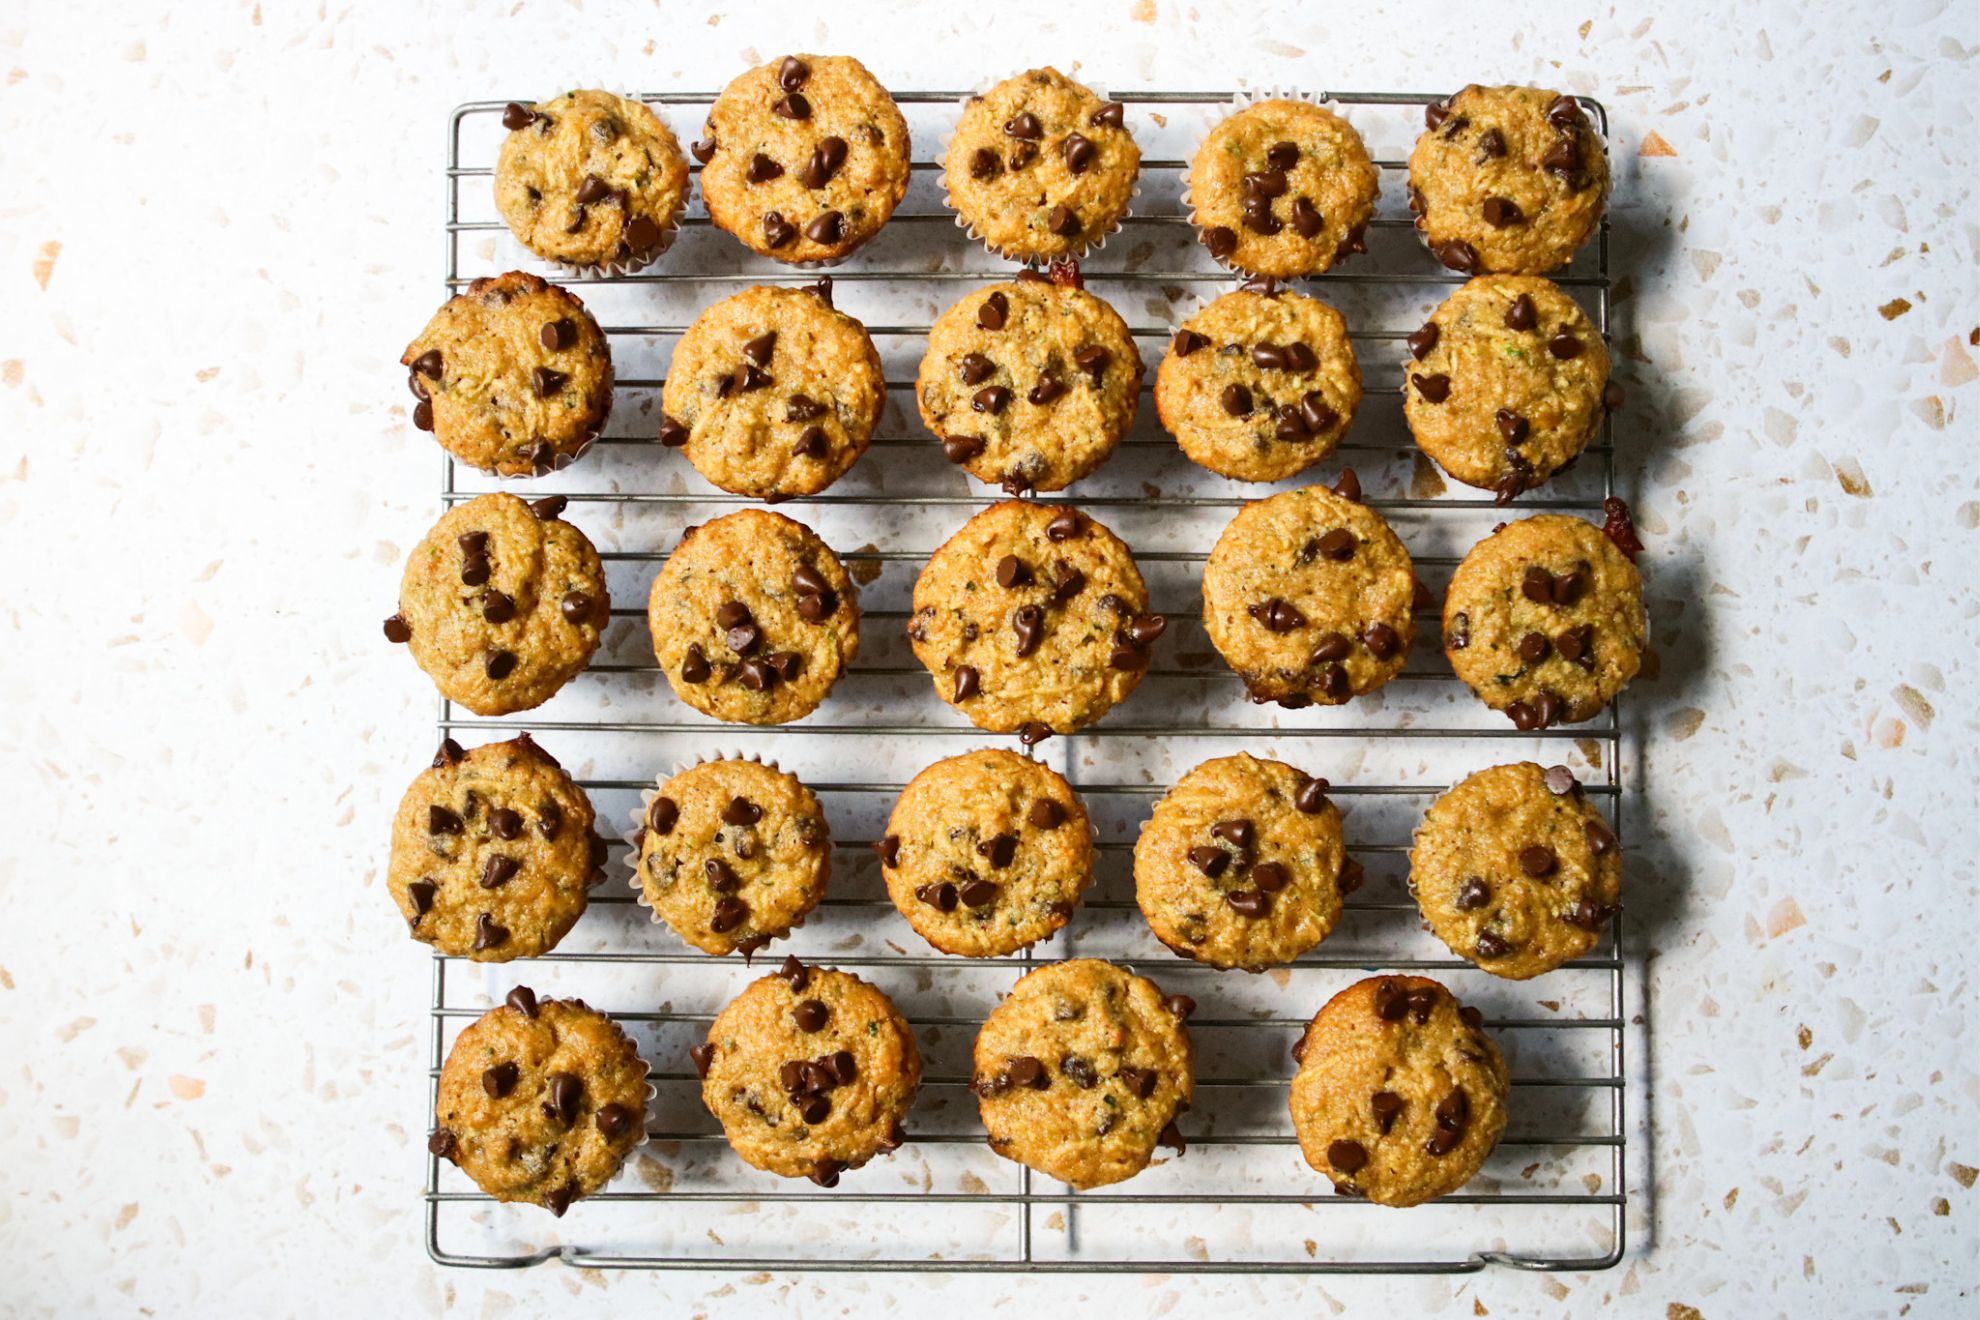 This is an overhead horizontal image of mini muffins on a silver cooling rack. The muffins are topped with mini chocolate chips. The cooling rack sits on a whiter terrazzo surface.